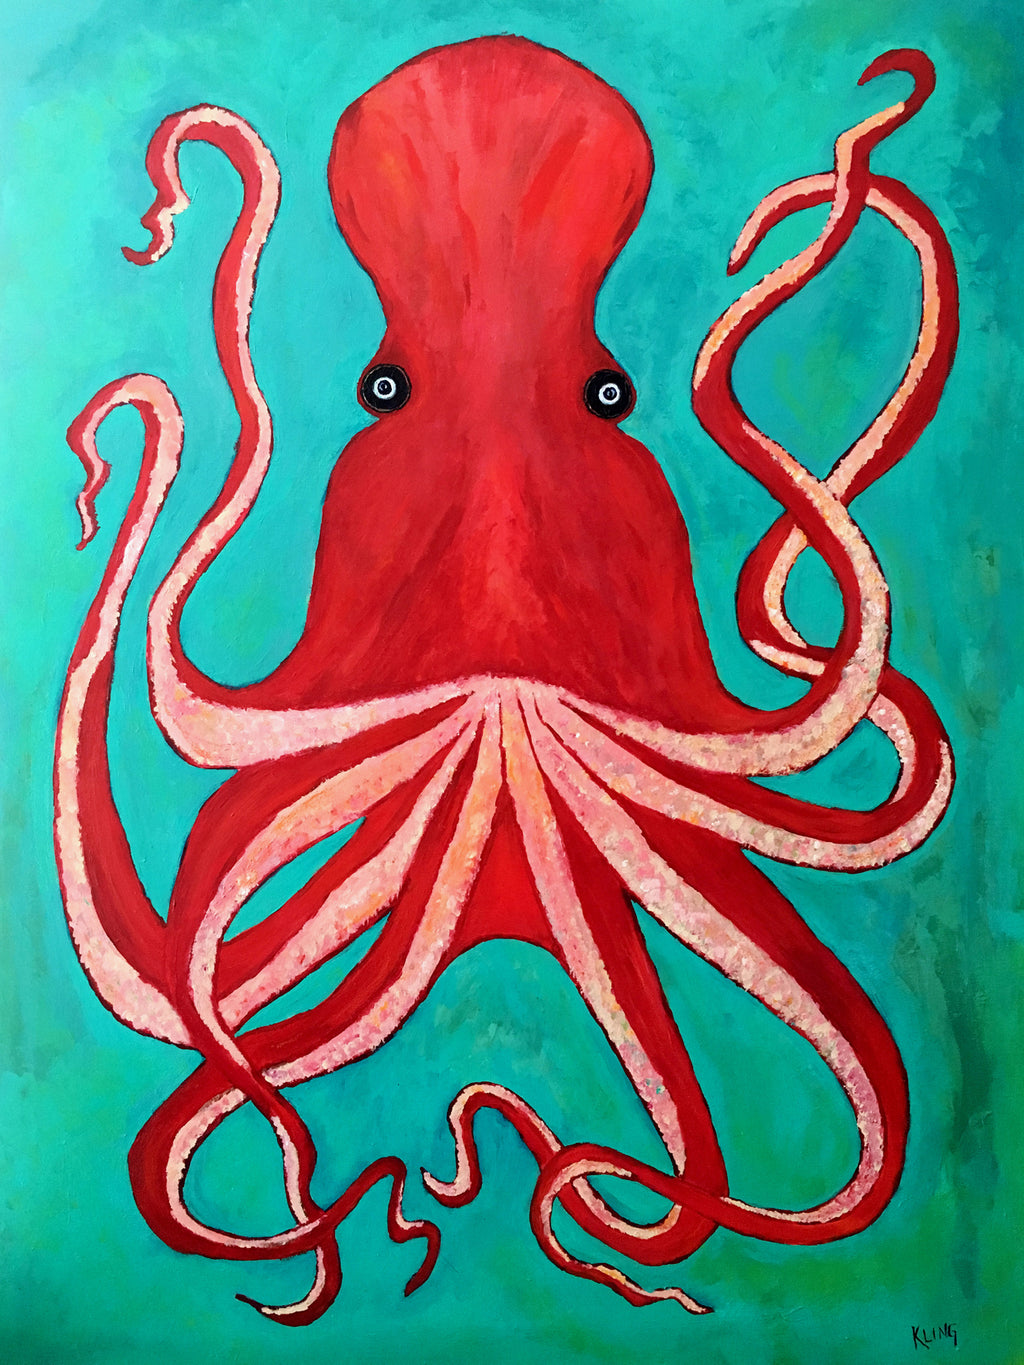 The Big Red Octopus